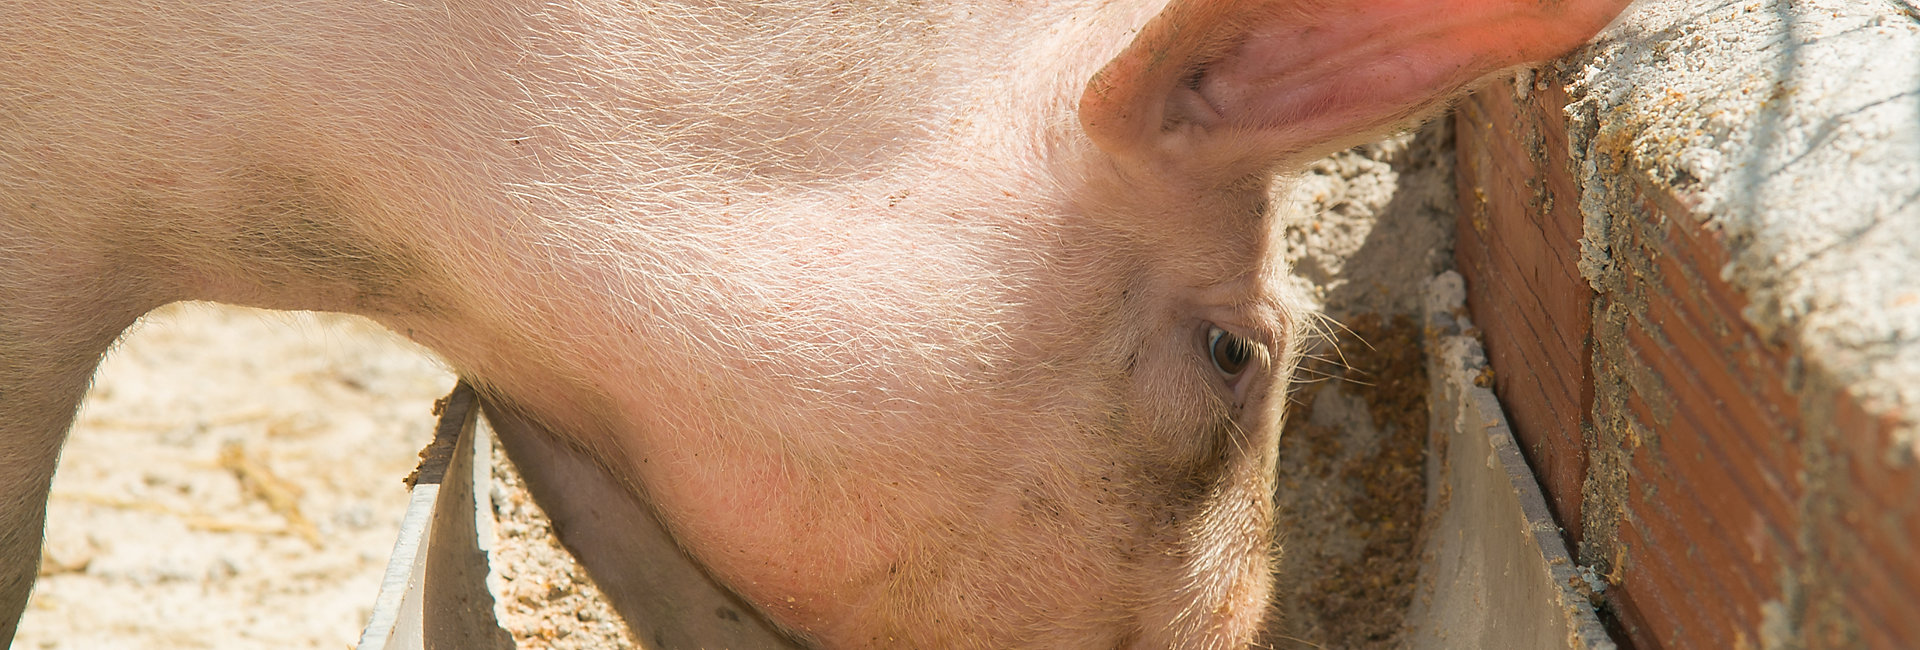 440621161 Portrait of hungry pig